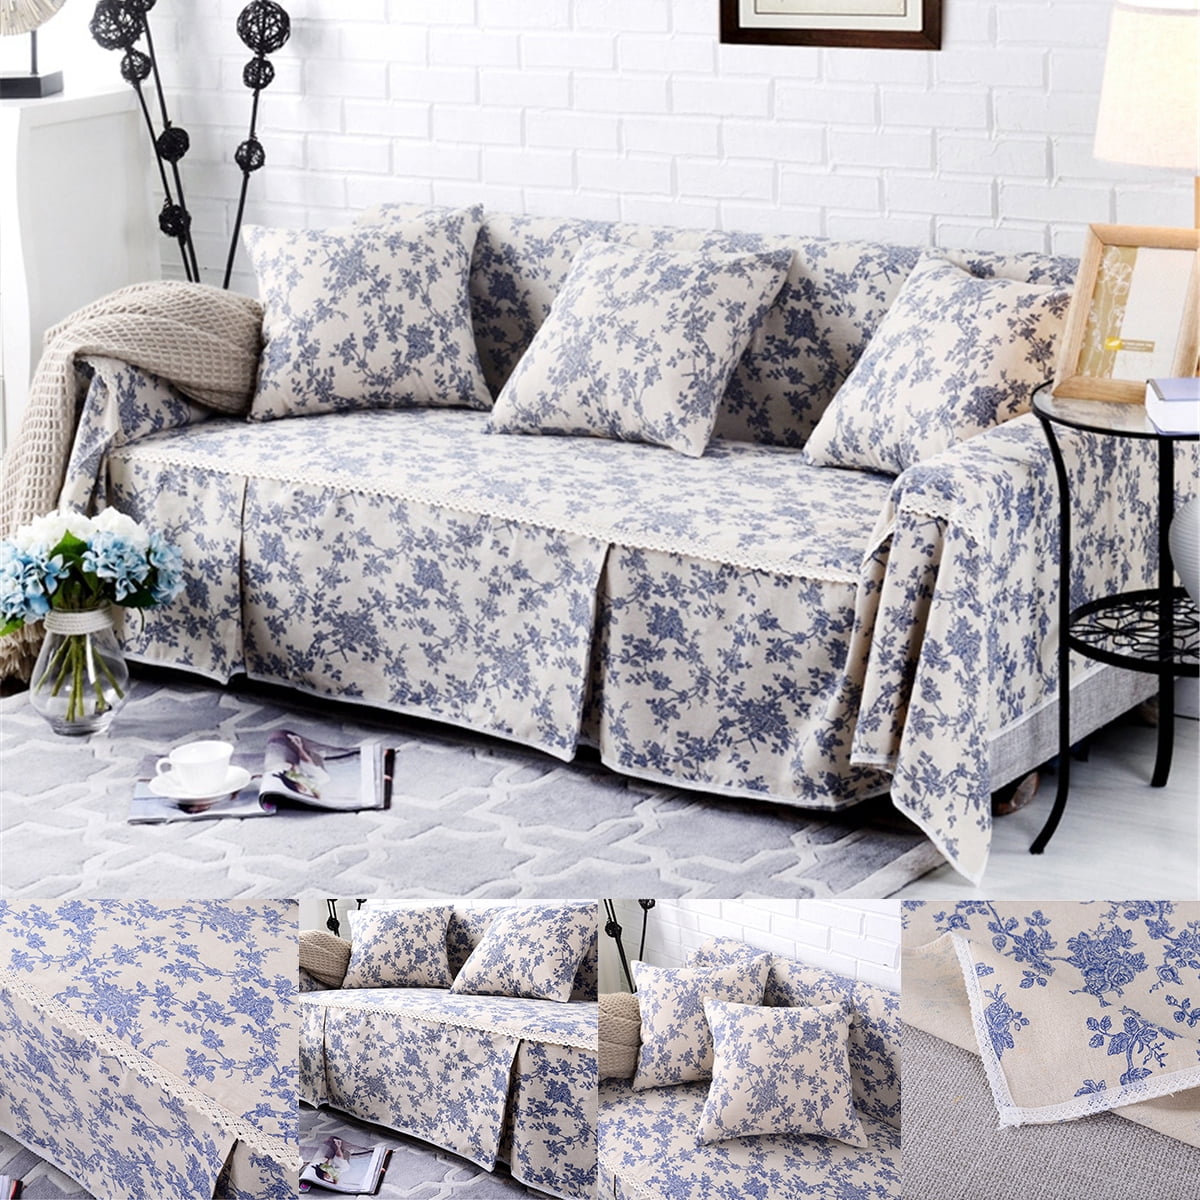 Details about   1pc Sofa Cover Cotton Couch Protective Slipcover Decorative Non-slip Sofa Towel